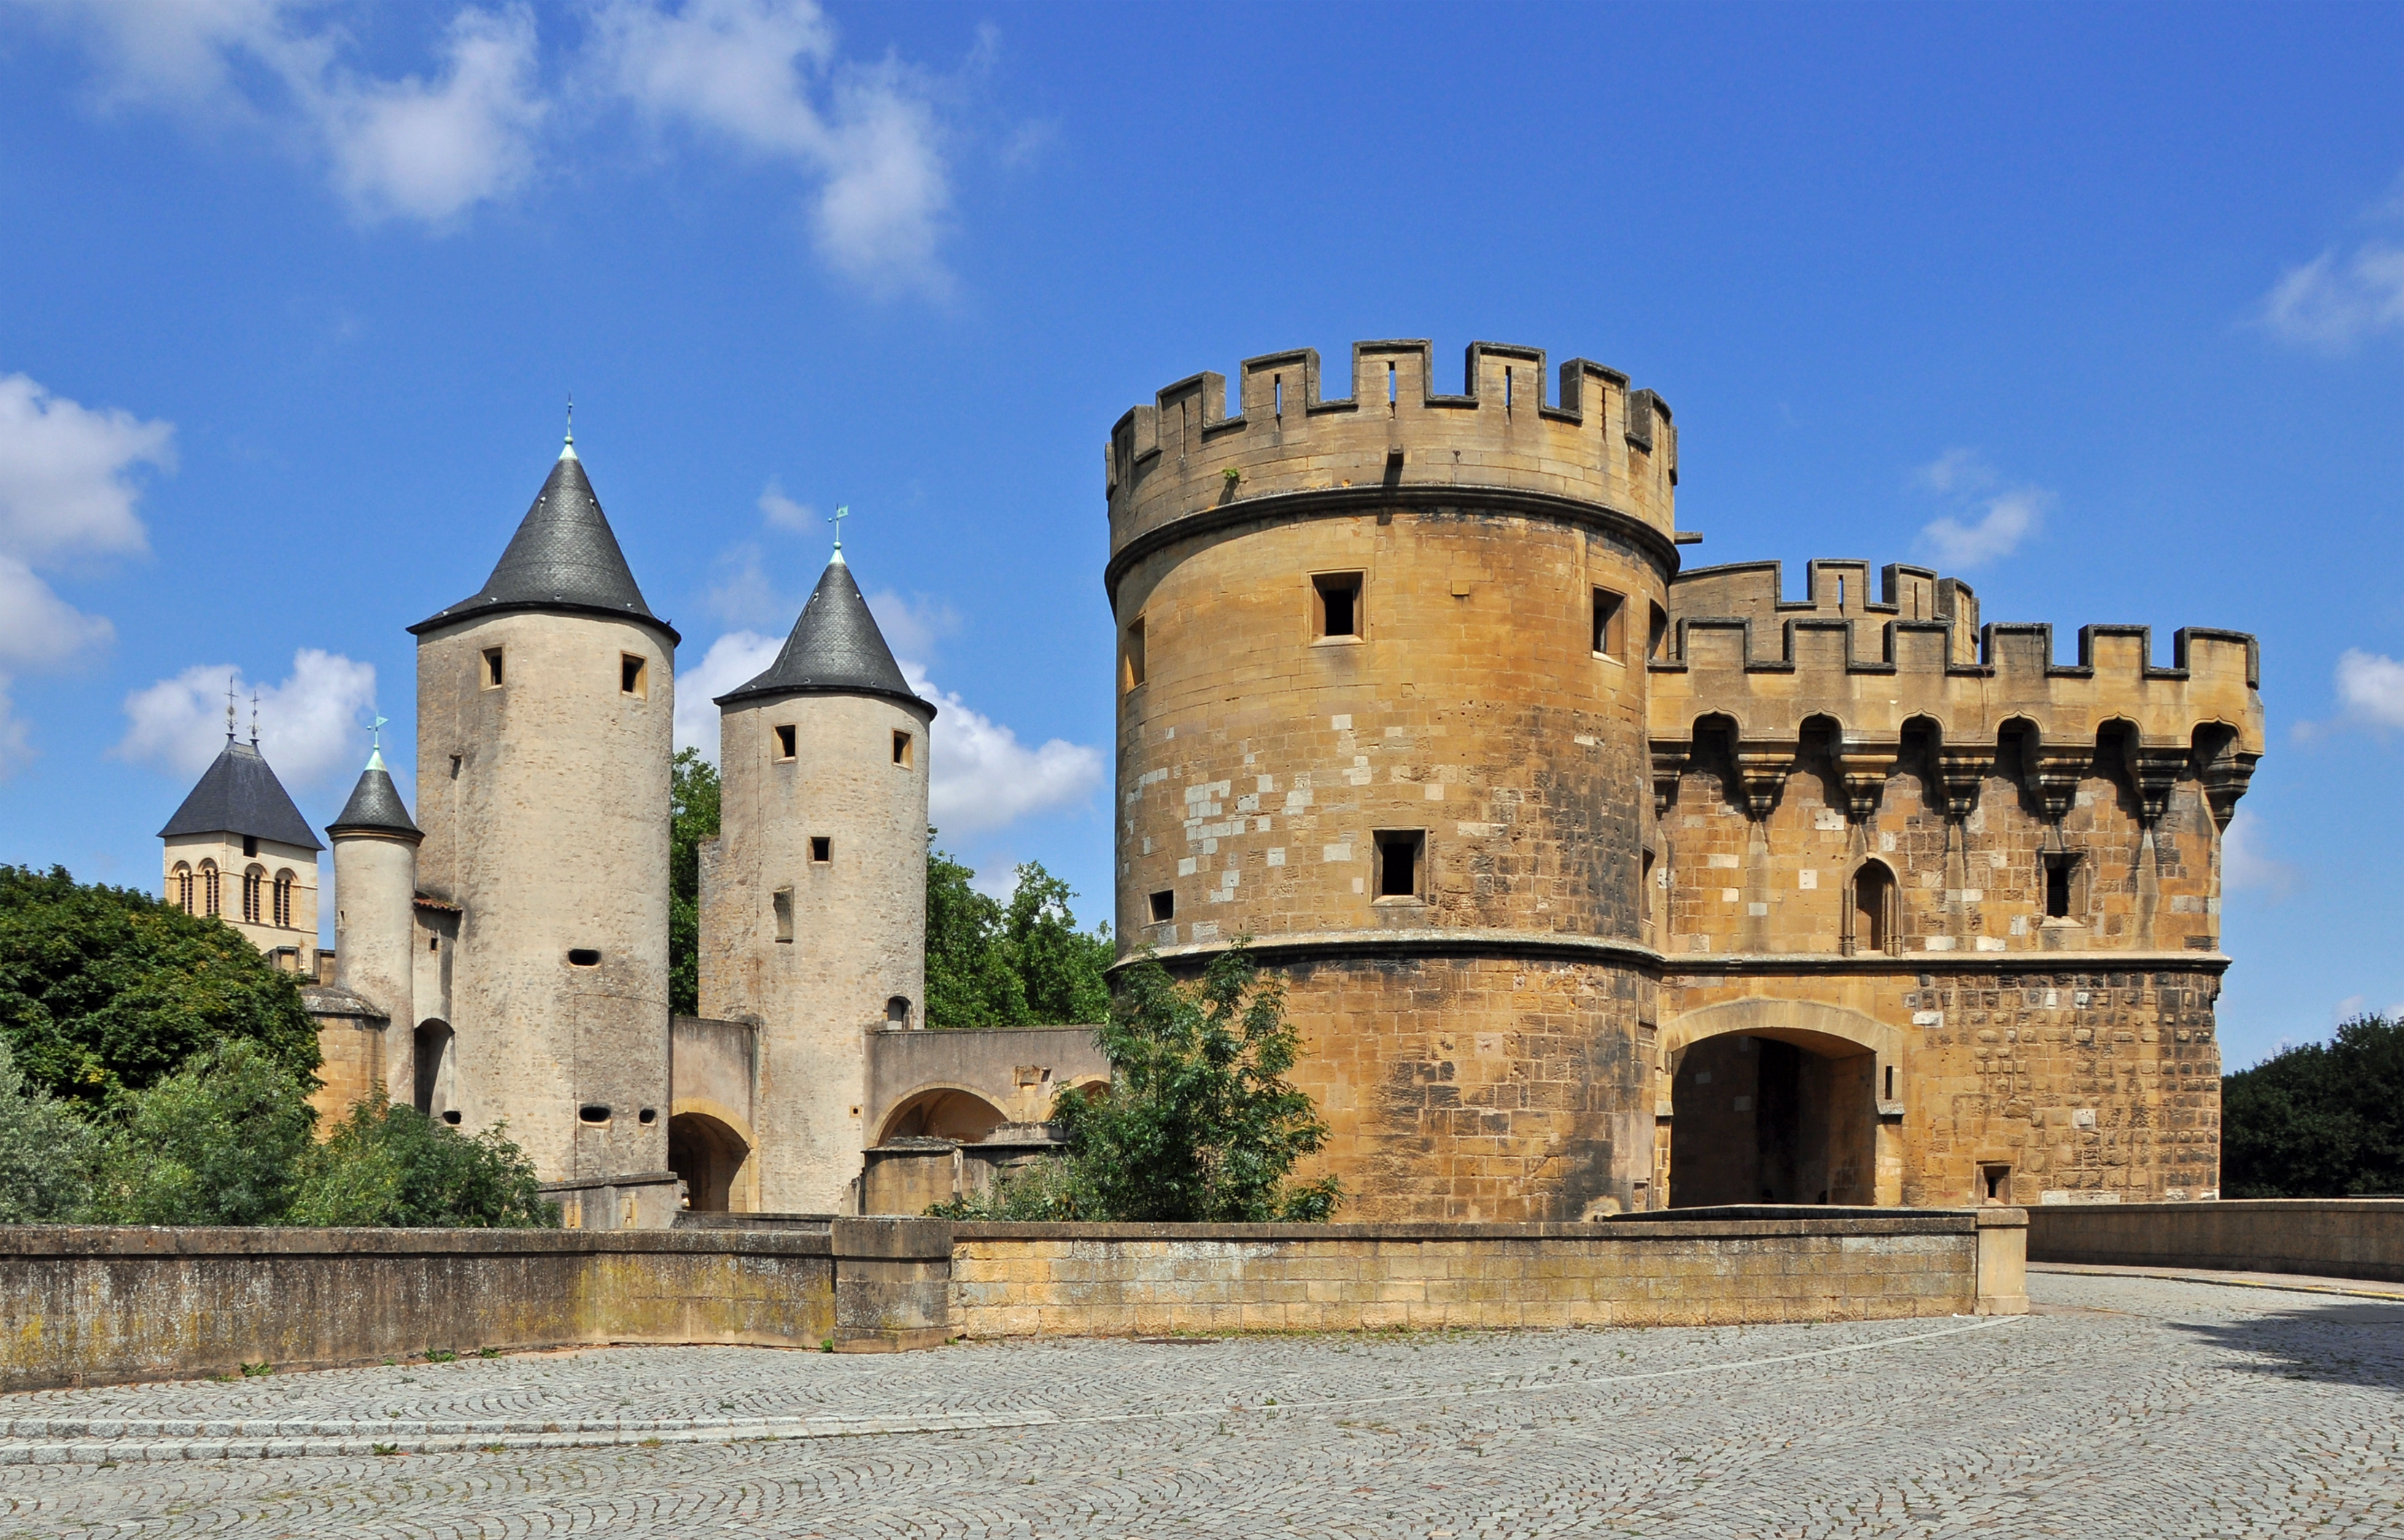 Old Castle in Metz, France | Top quality wallpapers